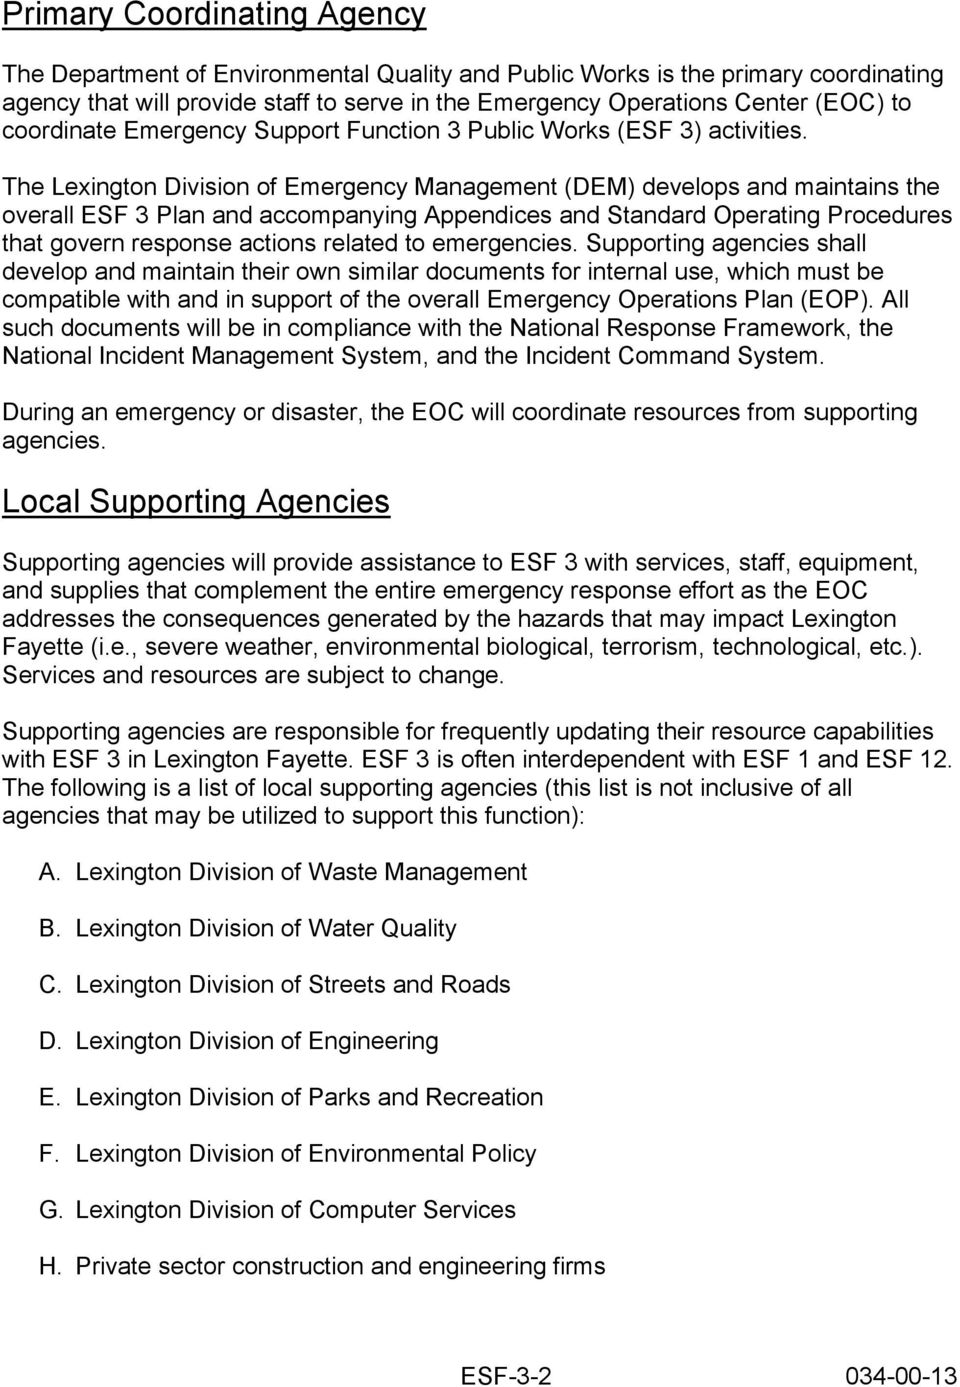 The Lexington Division of Emergency Management (DEM) develops and maintains the overall ESF 3 Plan and accompanying Appendices and Standard Operating Procedures that govern response actions related